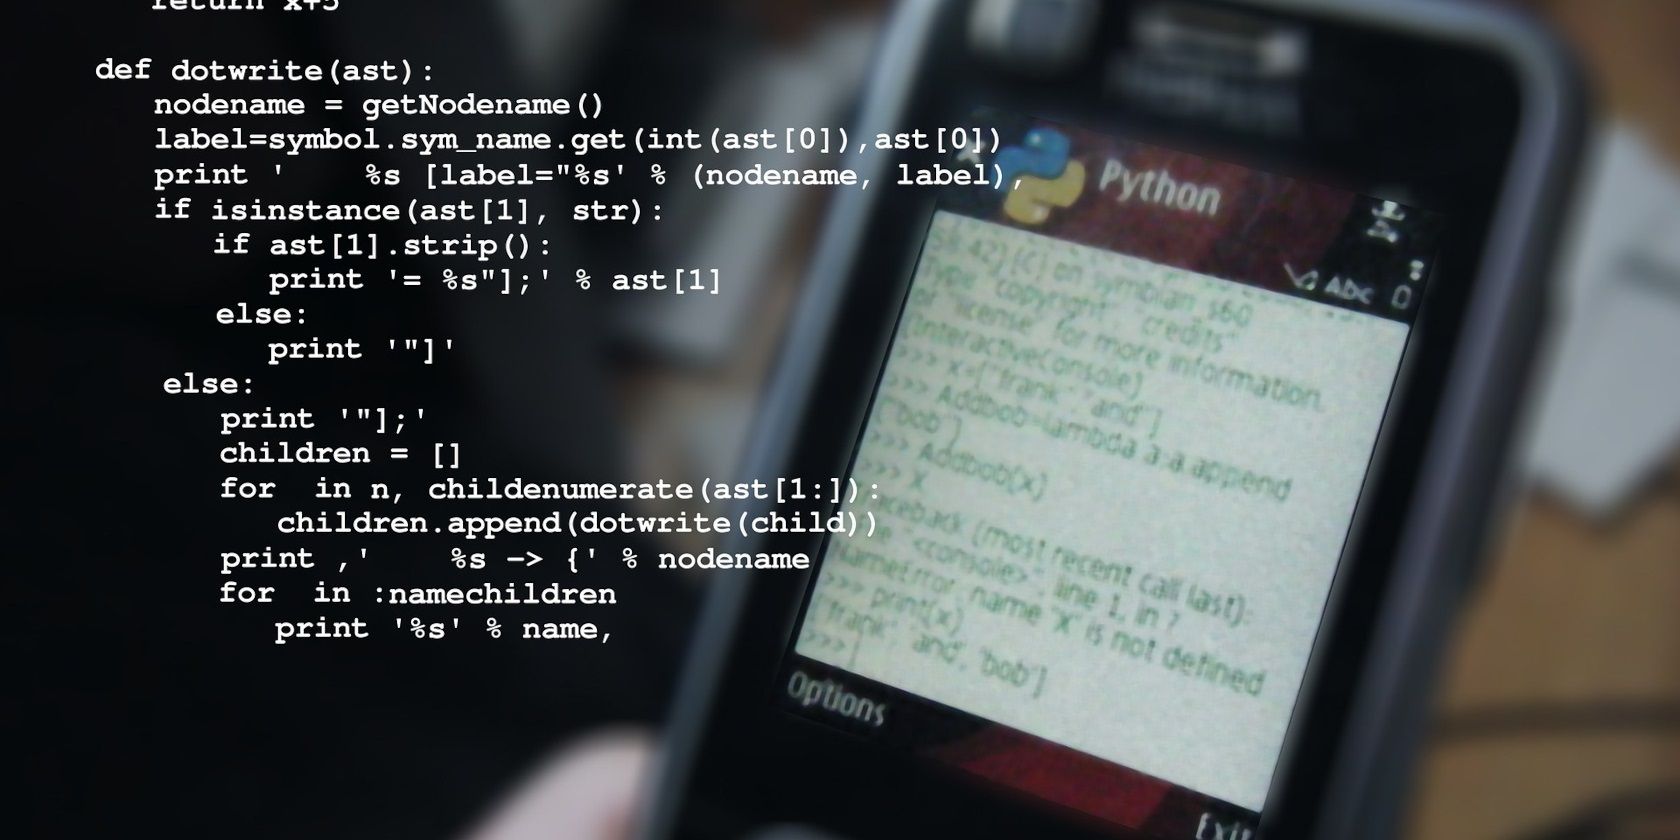 An image showing Python code overlaying a mobile phone